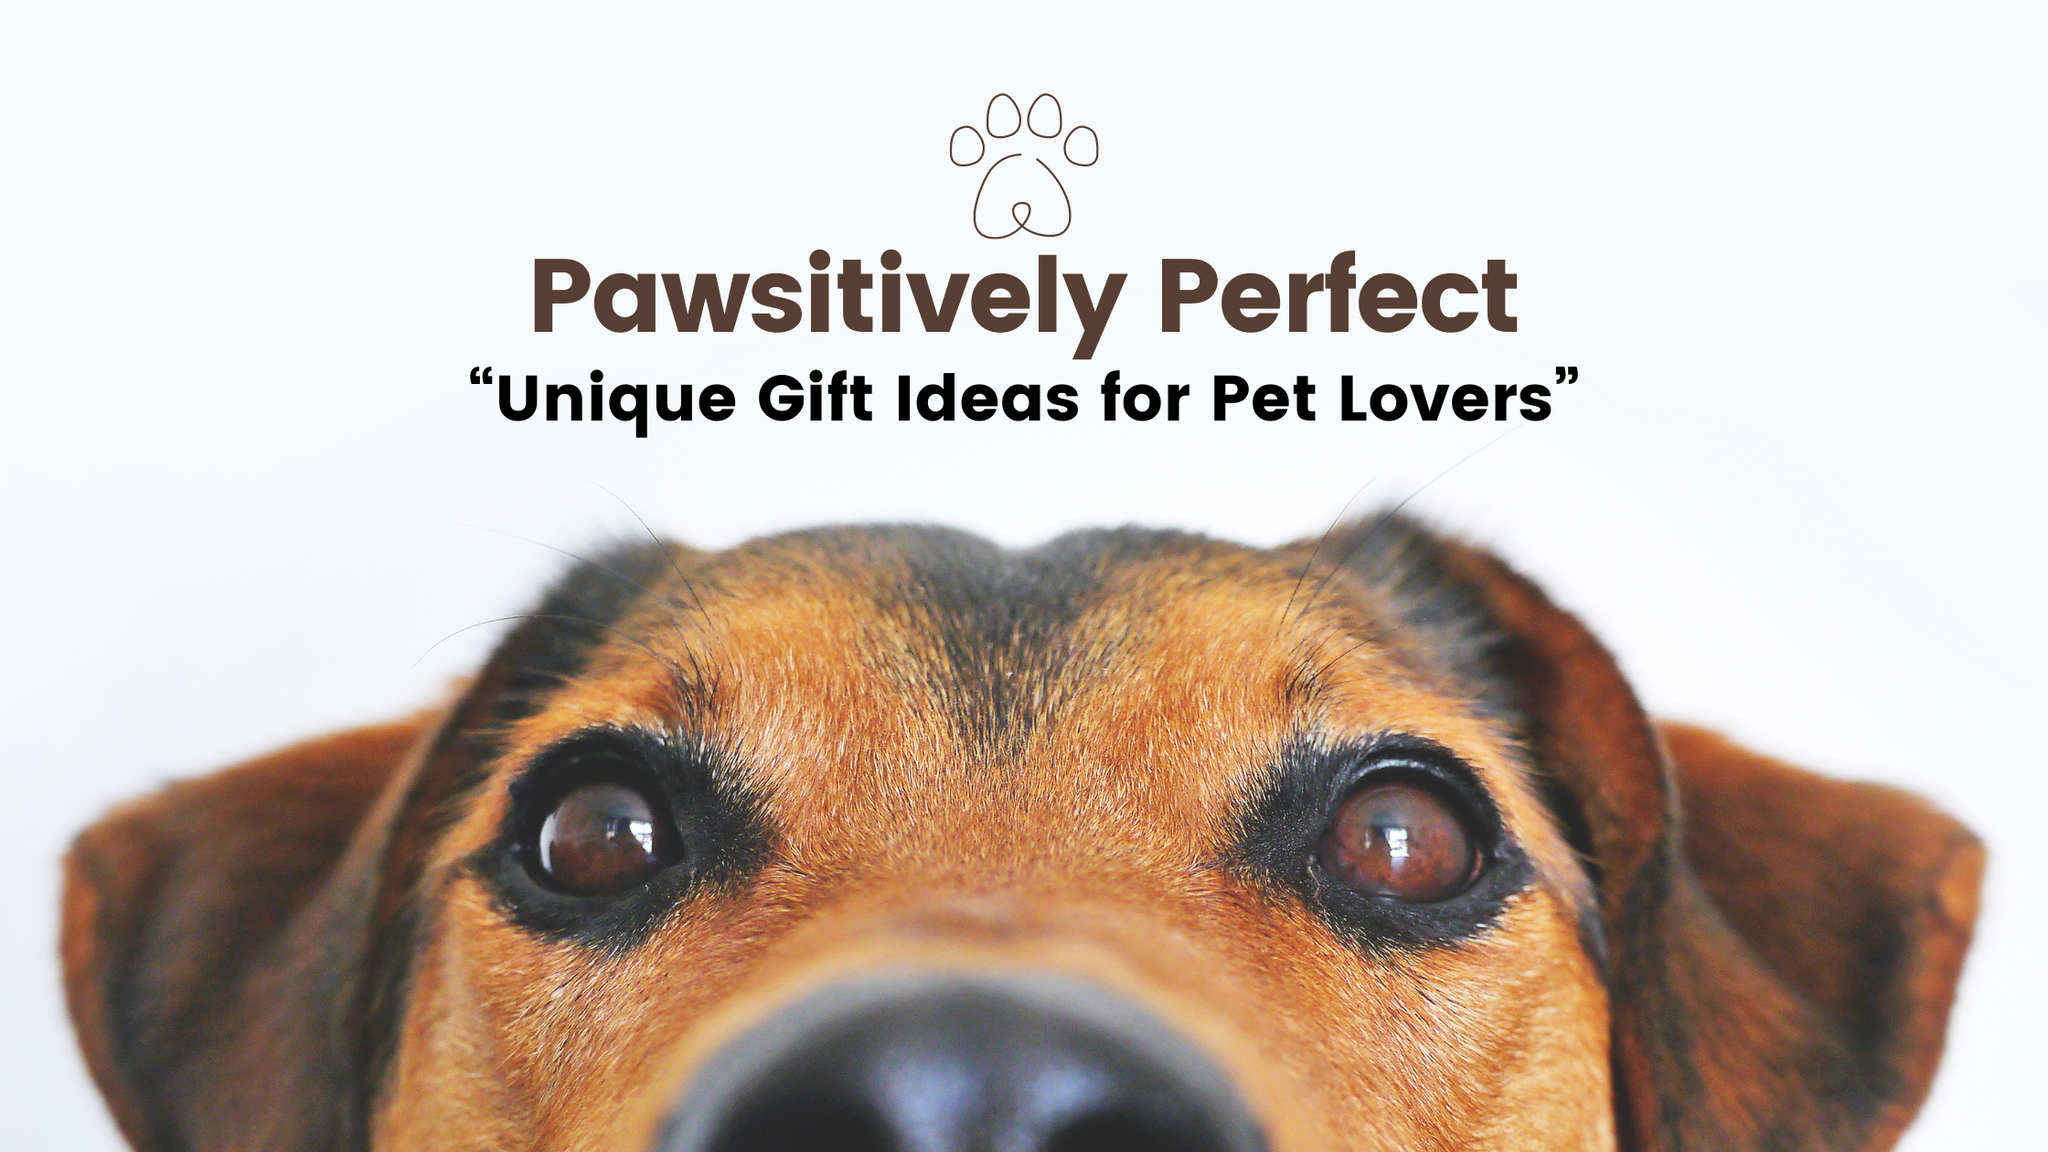 Pawsitively Perfect: Unique Gift Ideas for Pet Lovers